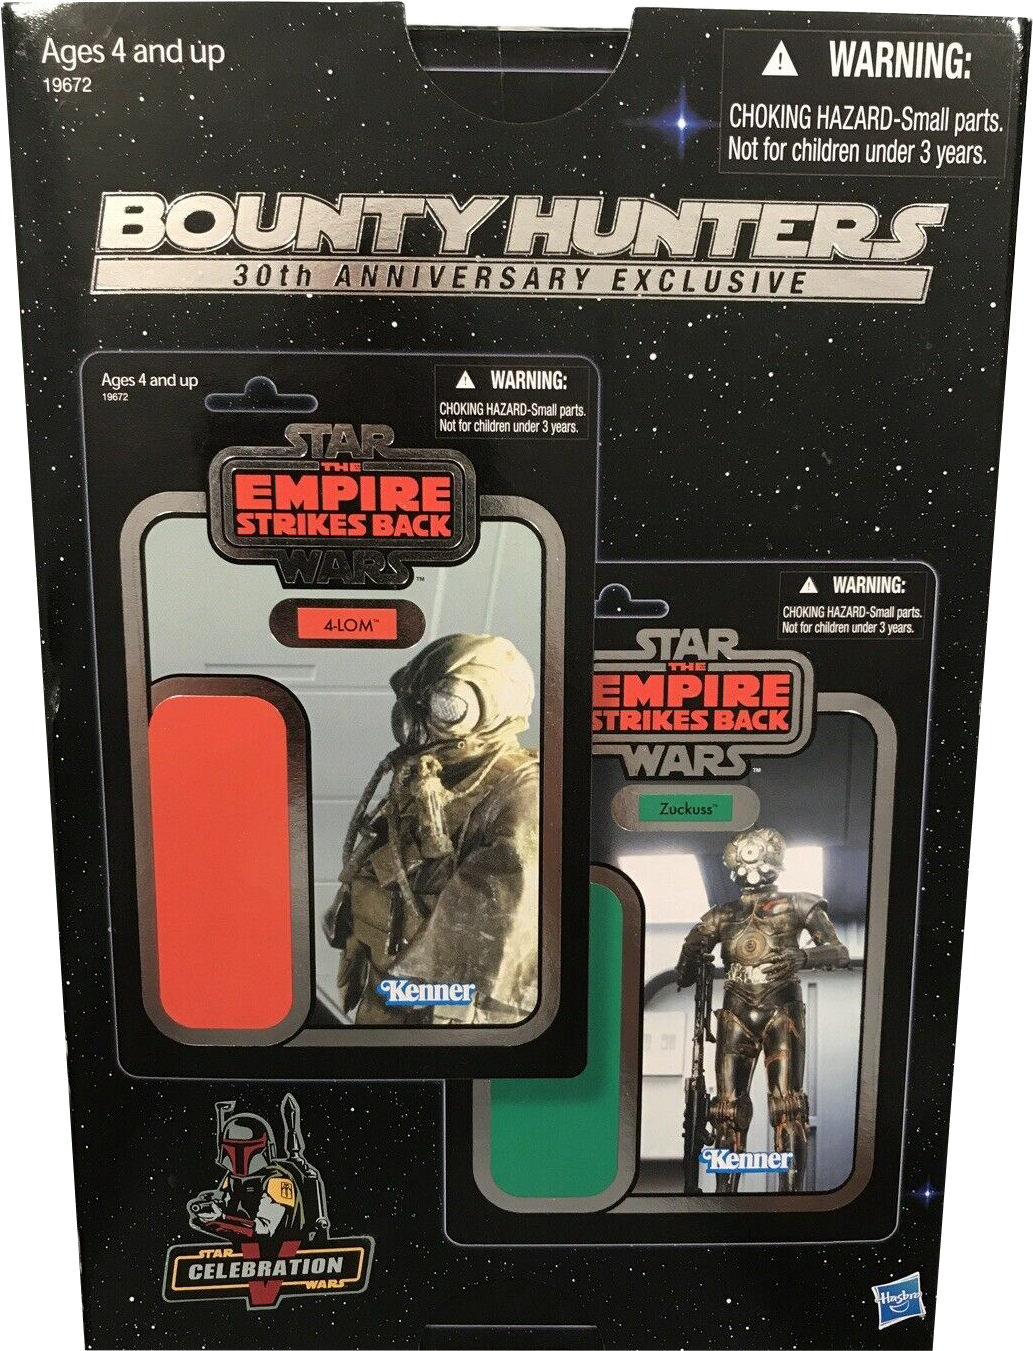 Star Wars Black Series 4-Lom Bounty Hunter Action Figure Collection Part Missing 